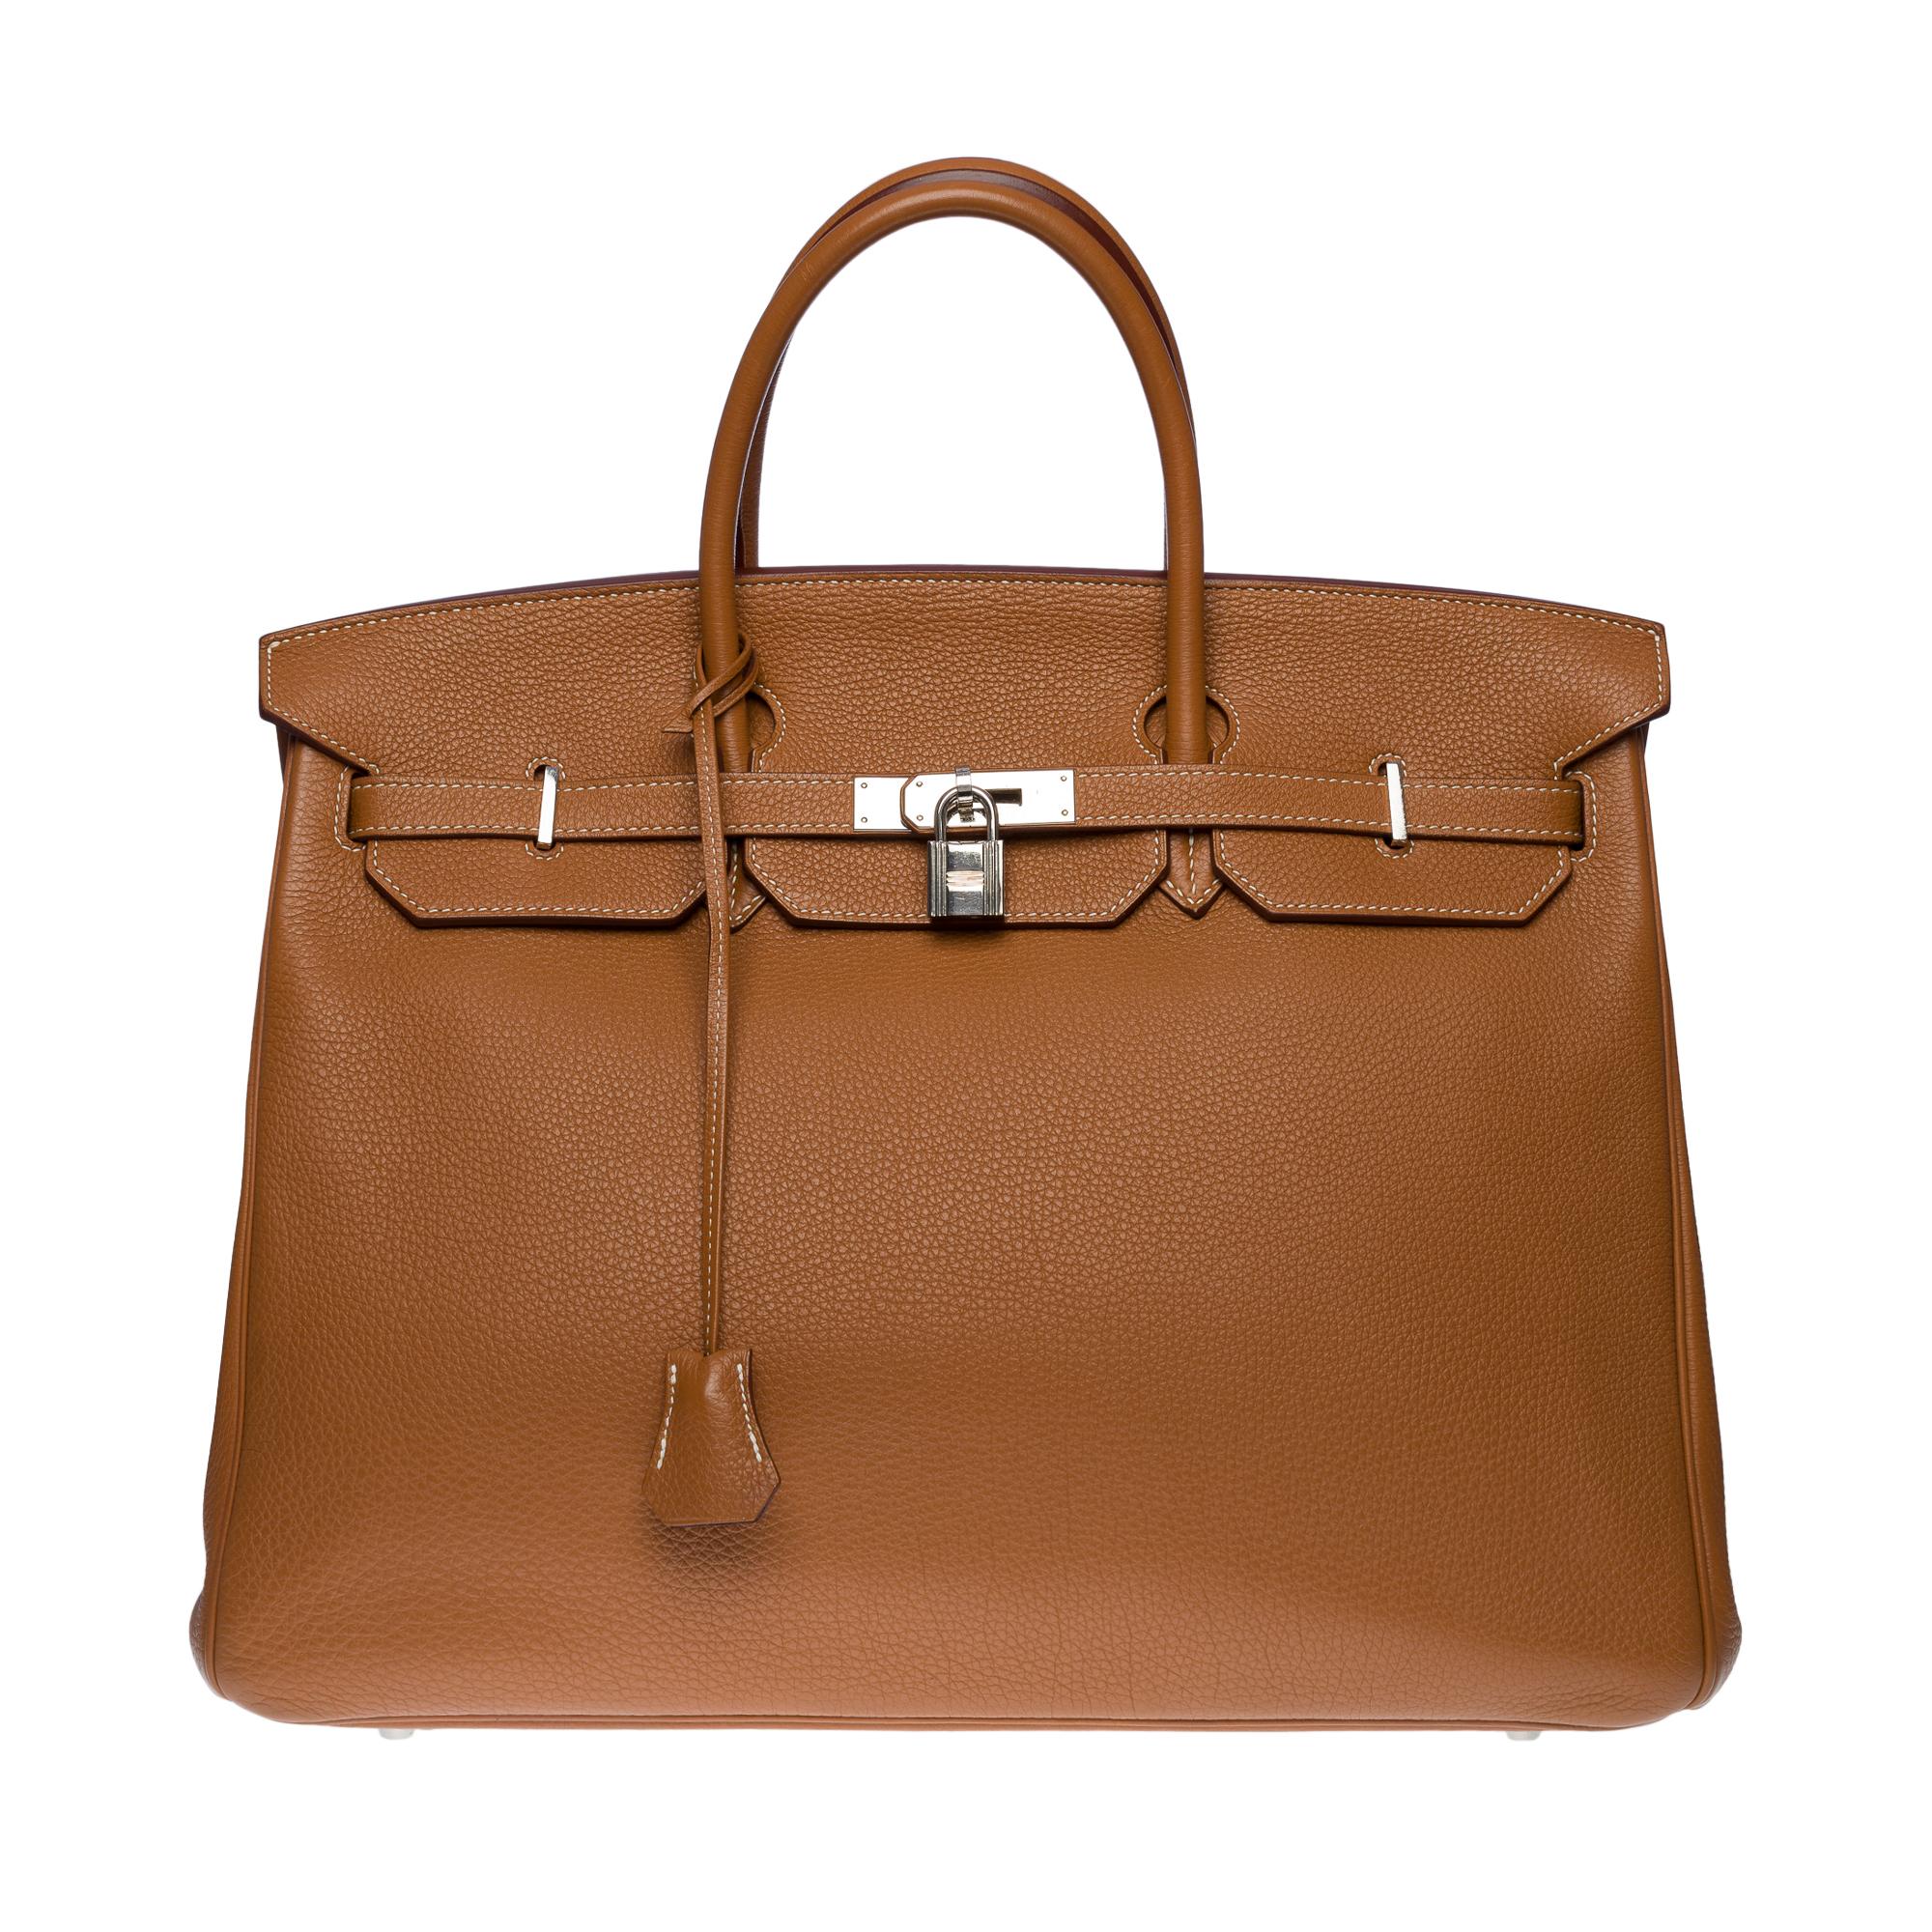 Beautiful Hermès Birkin 40 handbag in Togo Camel leather (Gold), palladium silver metal hardware, double handle in camel leather allowing a hand carry
Flap closure
Camel leather lining, one zippered pocket, one patch pocket
Signature: 